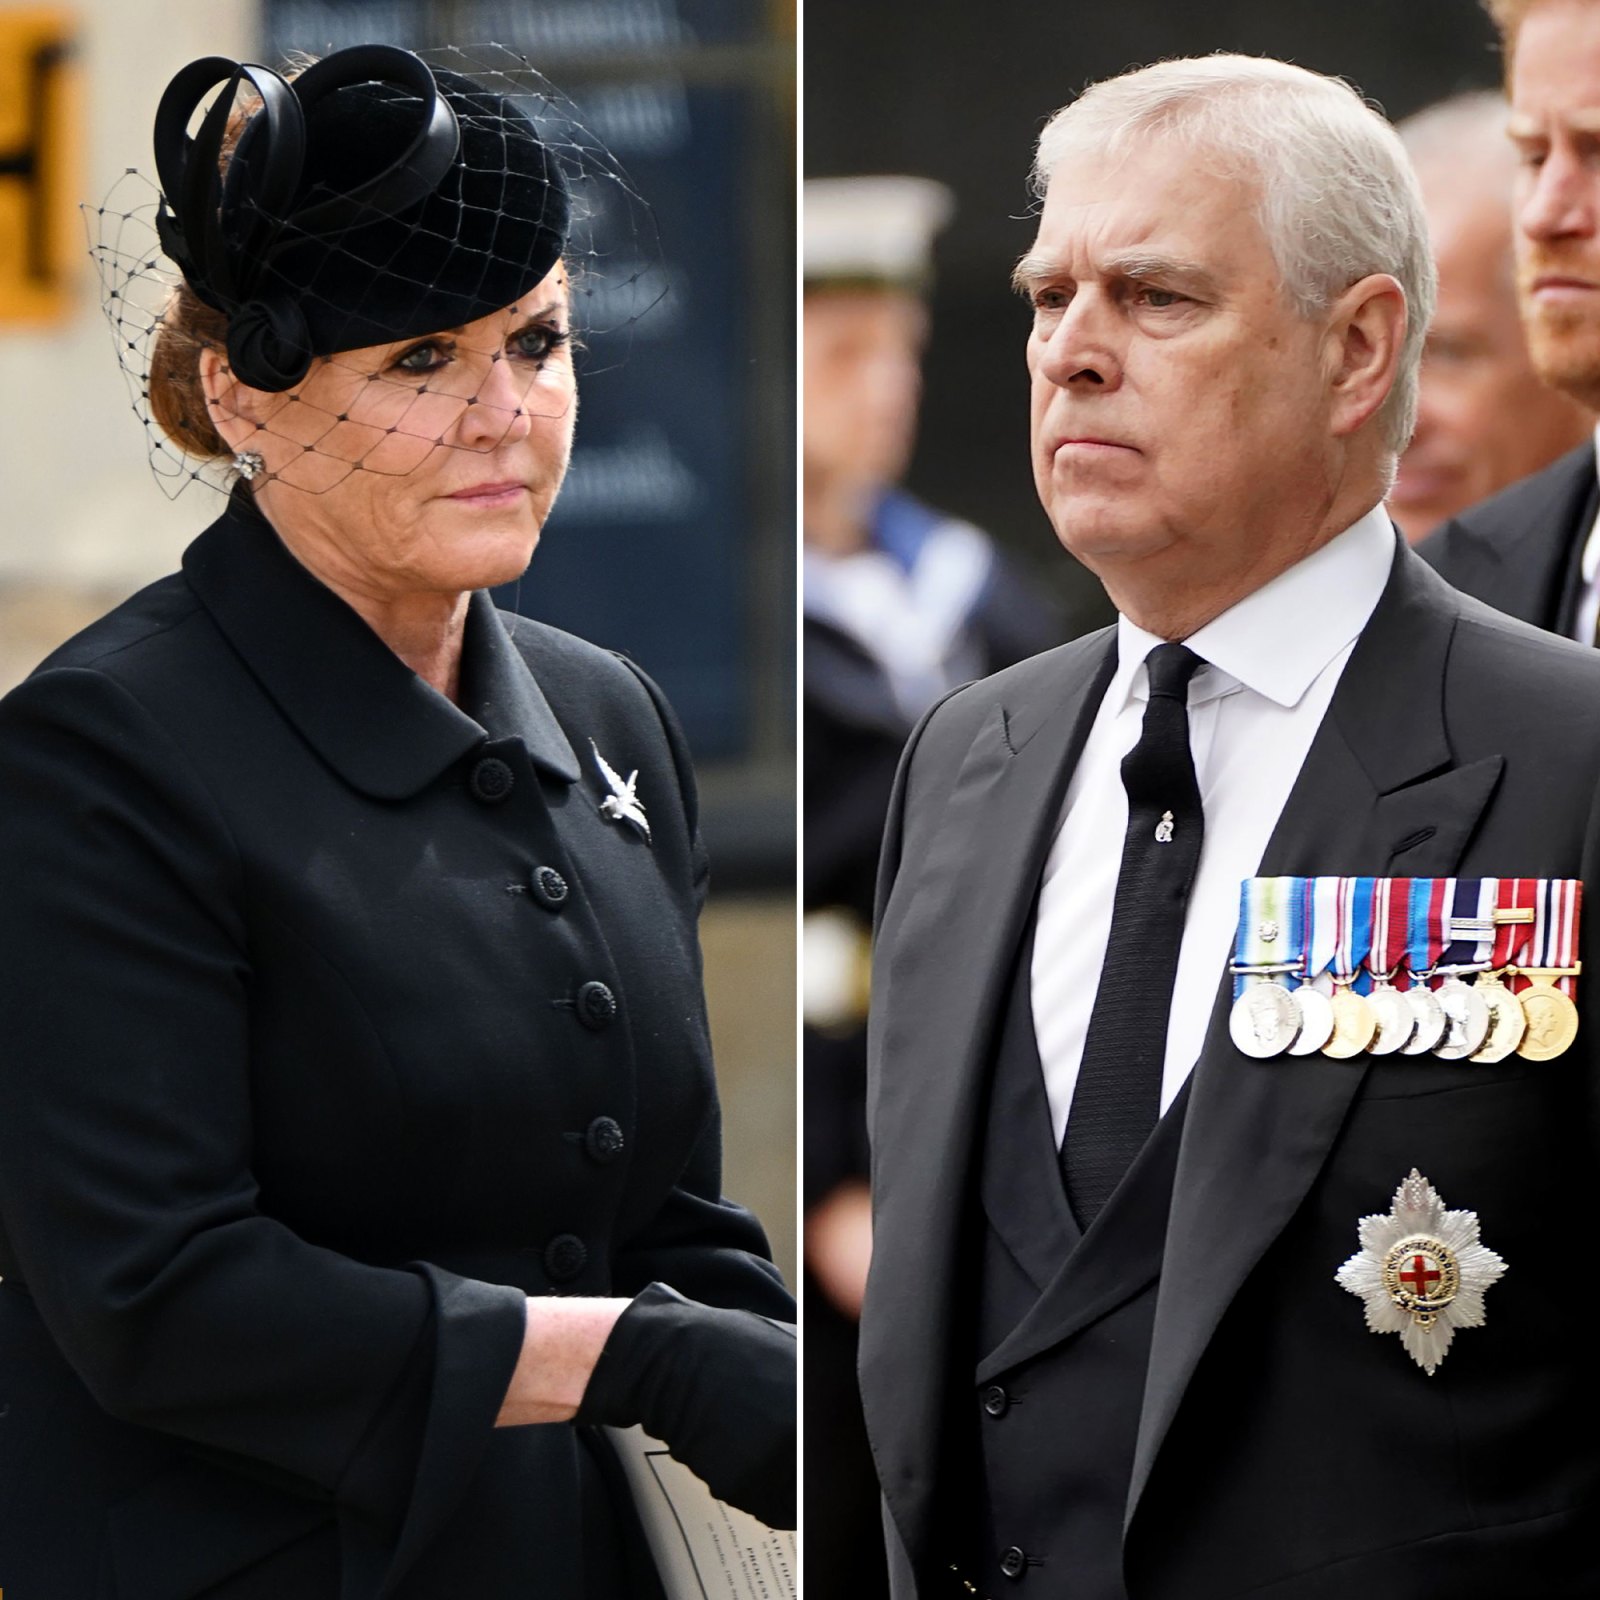 Sarah Ferguson Attends Queen Elizabeth II's Funeral as Her Ex-Husband Prince Andrew Appears in Morning Suit: Photos